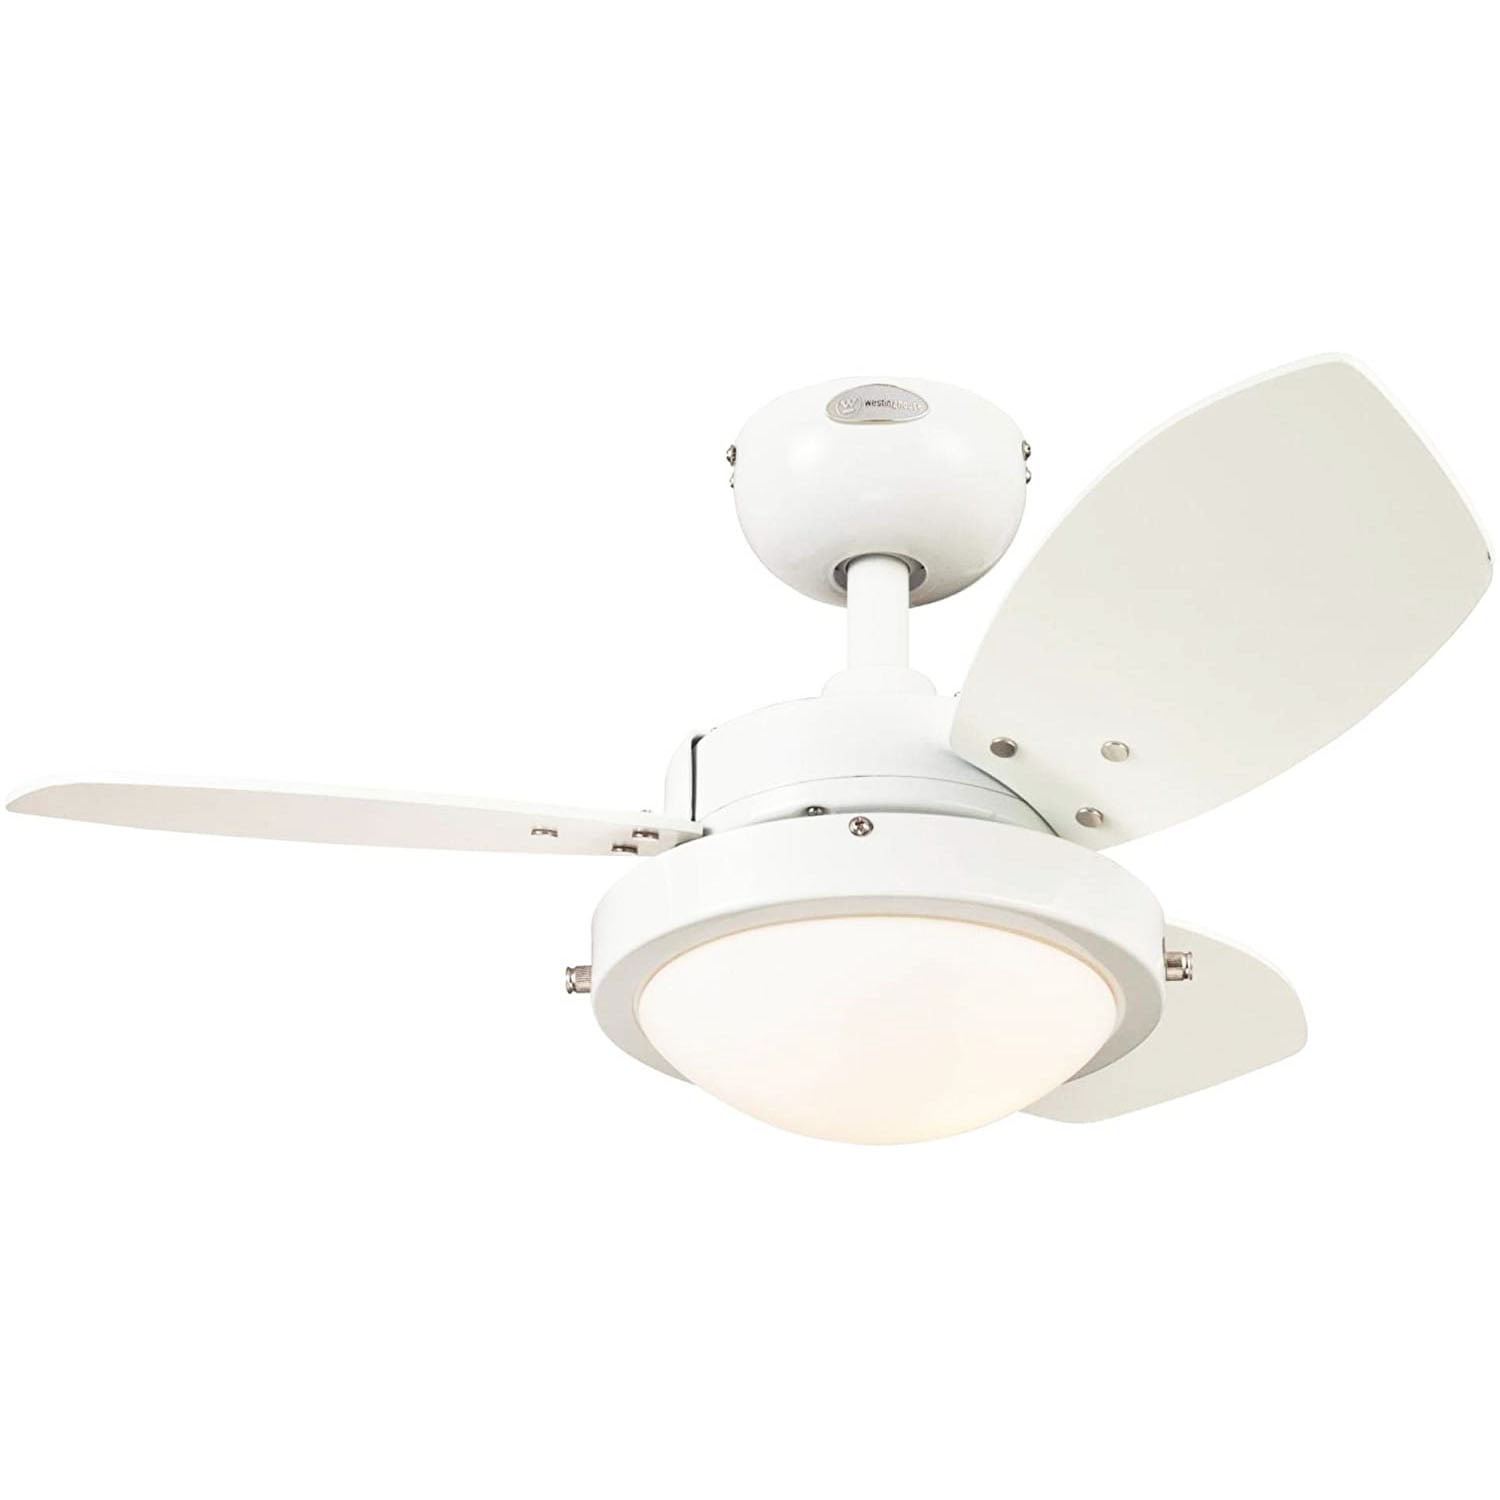 Turbo Swirl 30-Inch Indoor Ceiling Fan with Dimmable LED Light Fixture 